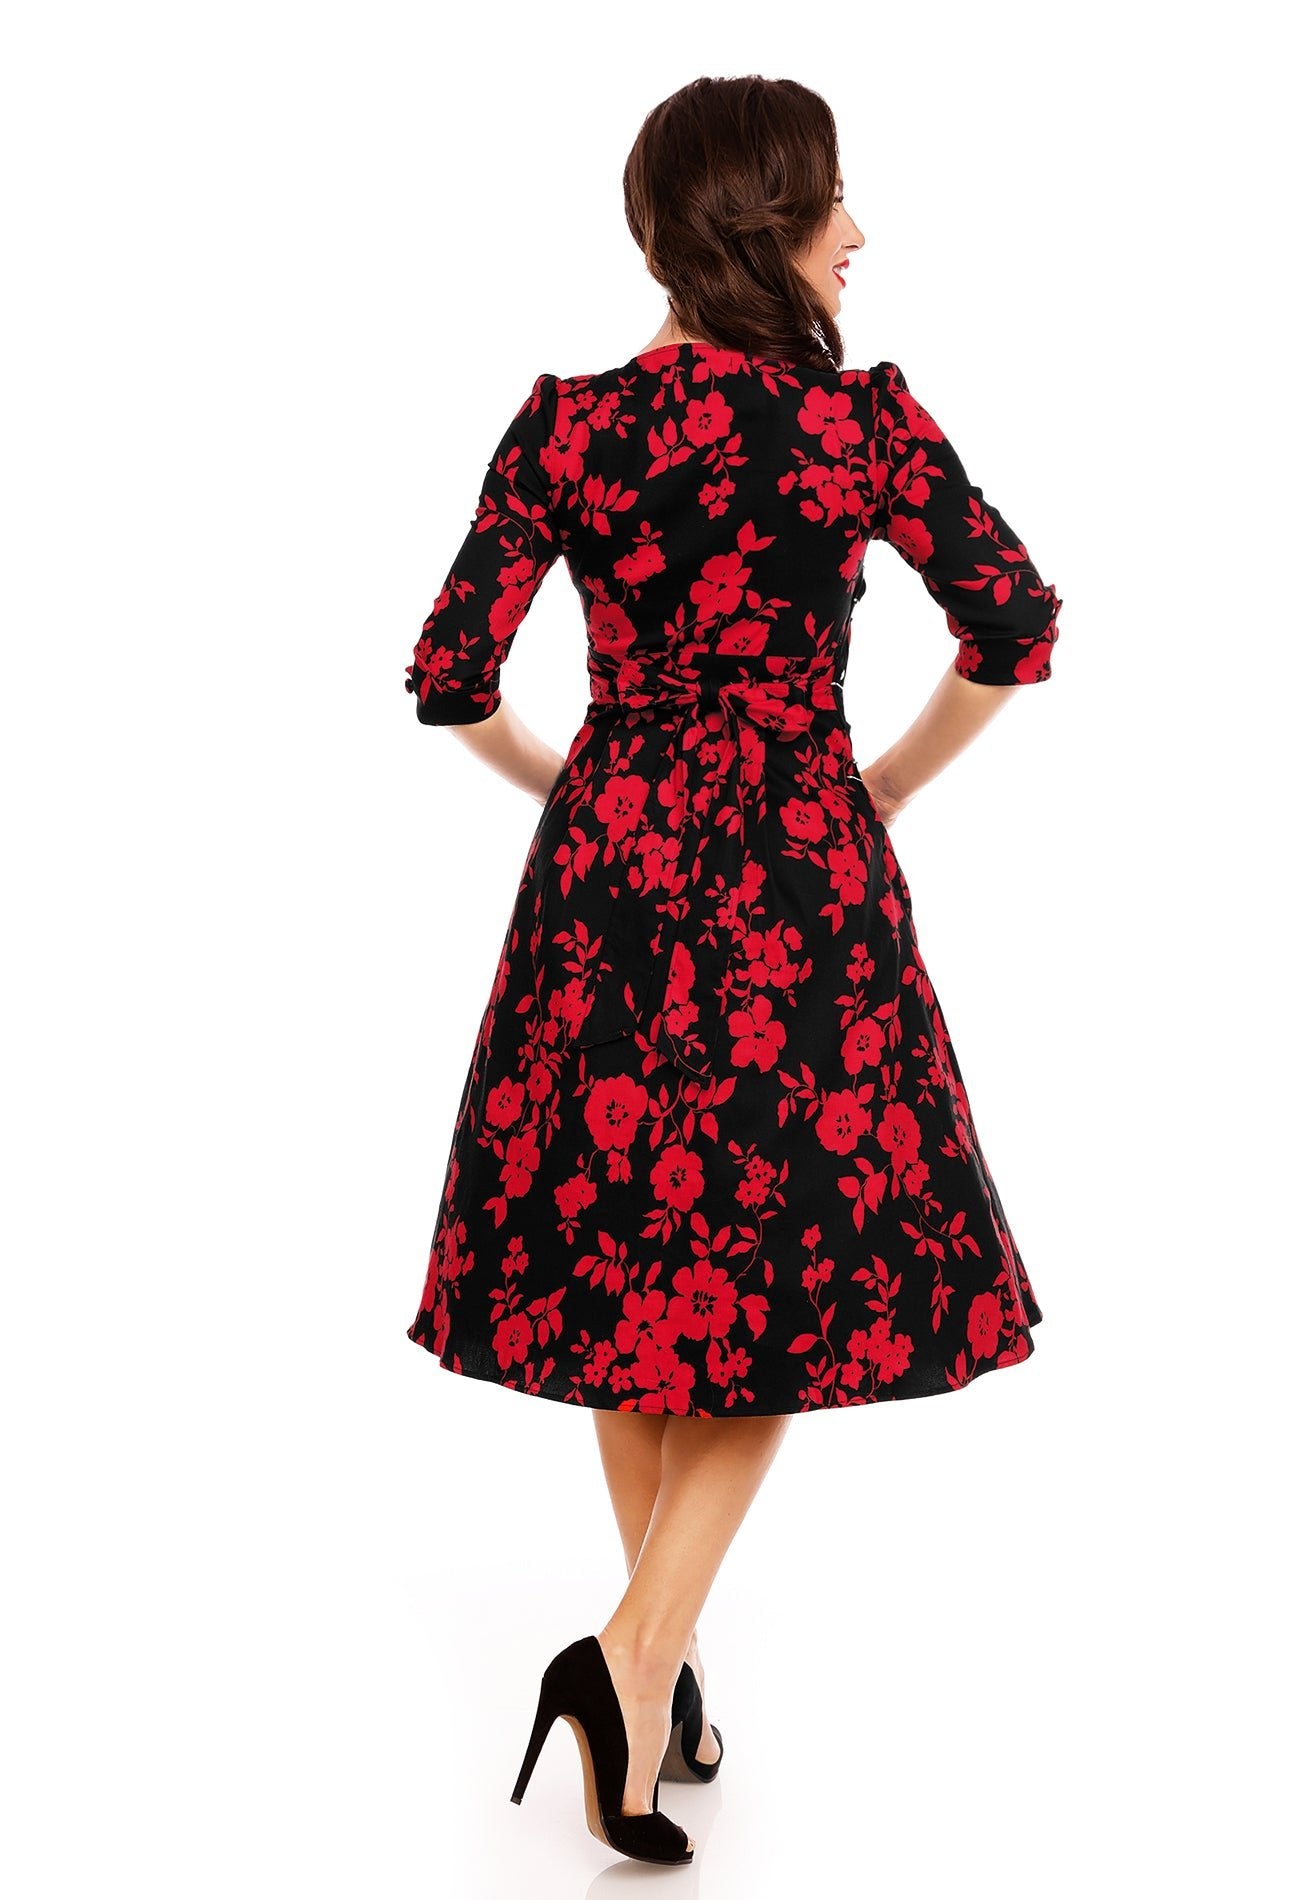 Long Sleeve 50's Style Swing Dress in Black-Red Floral